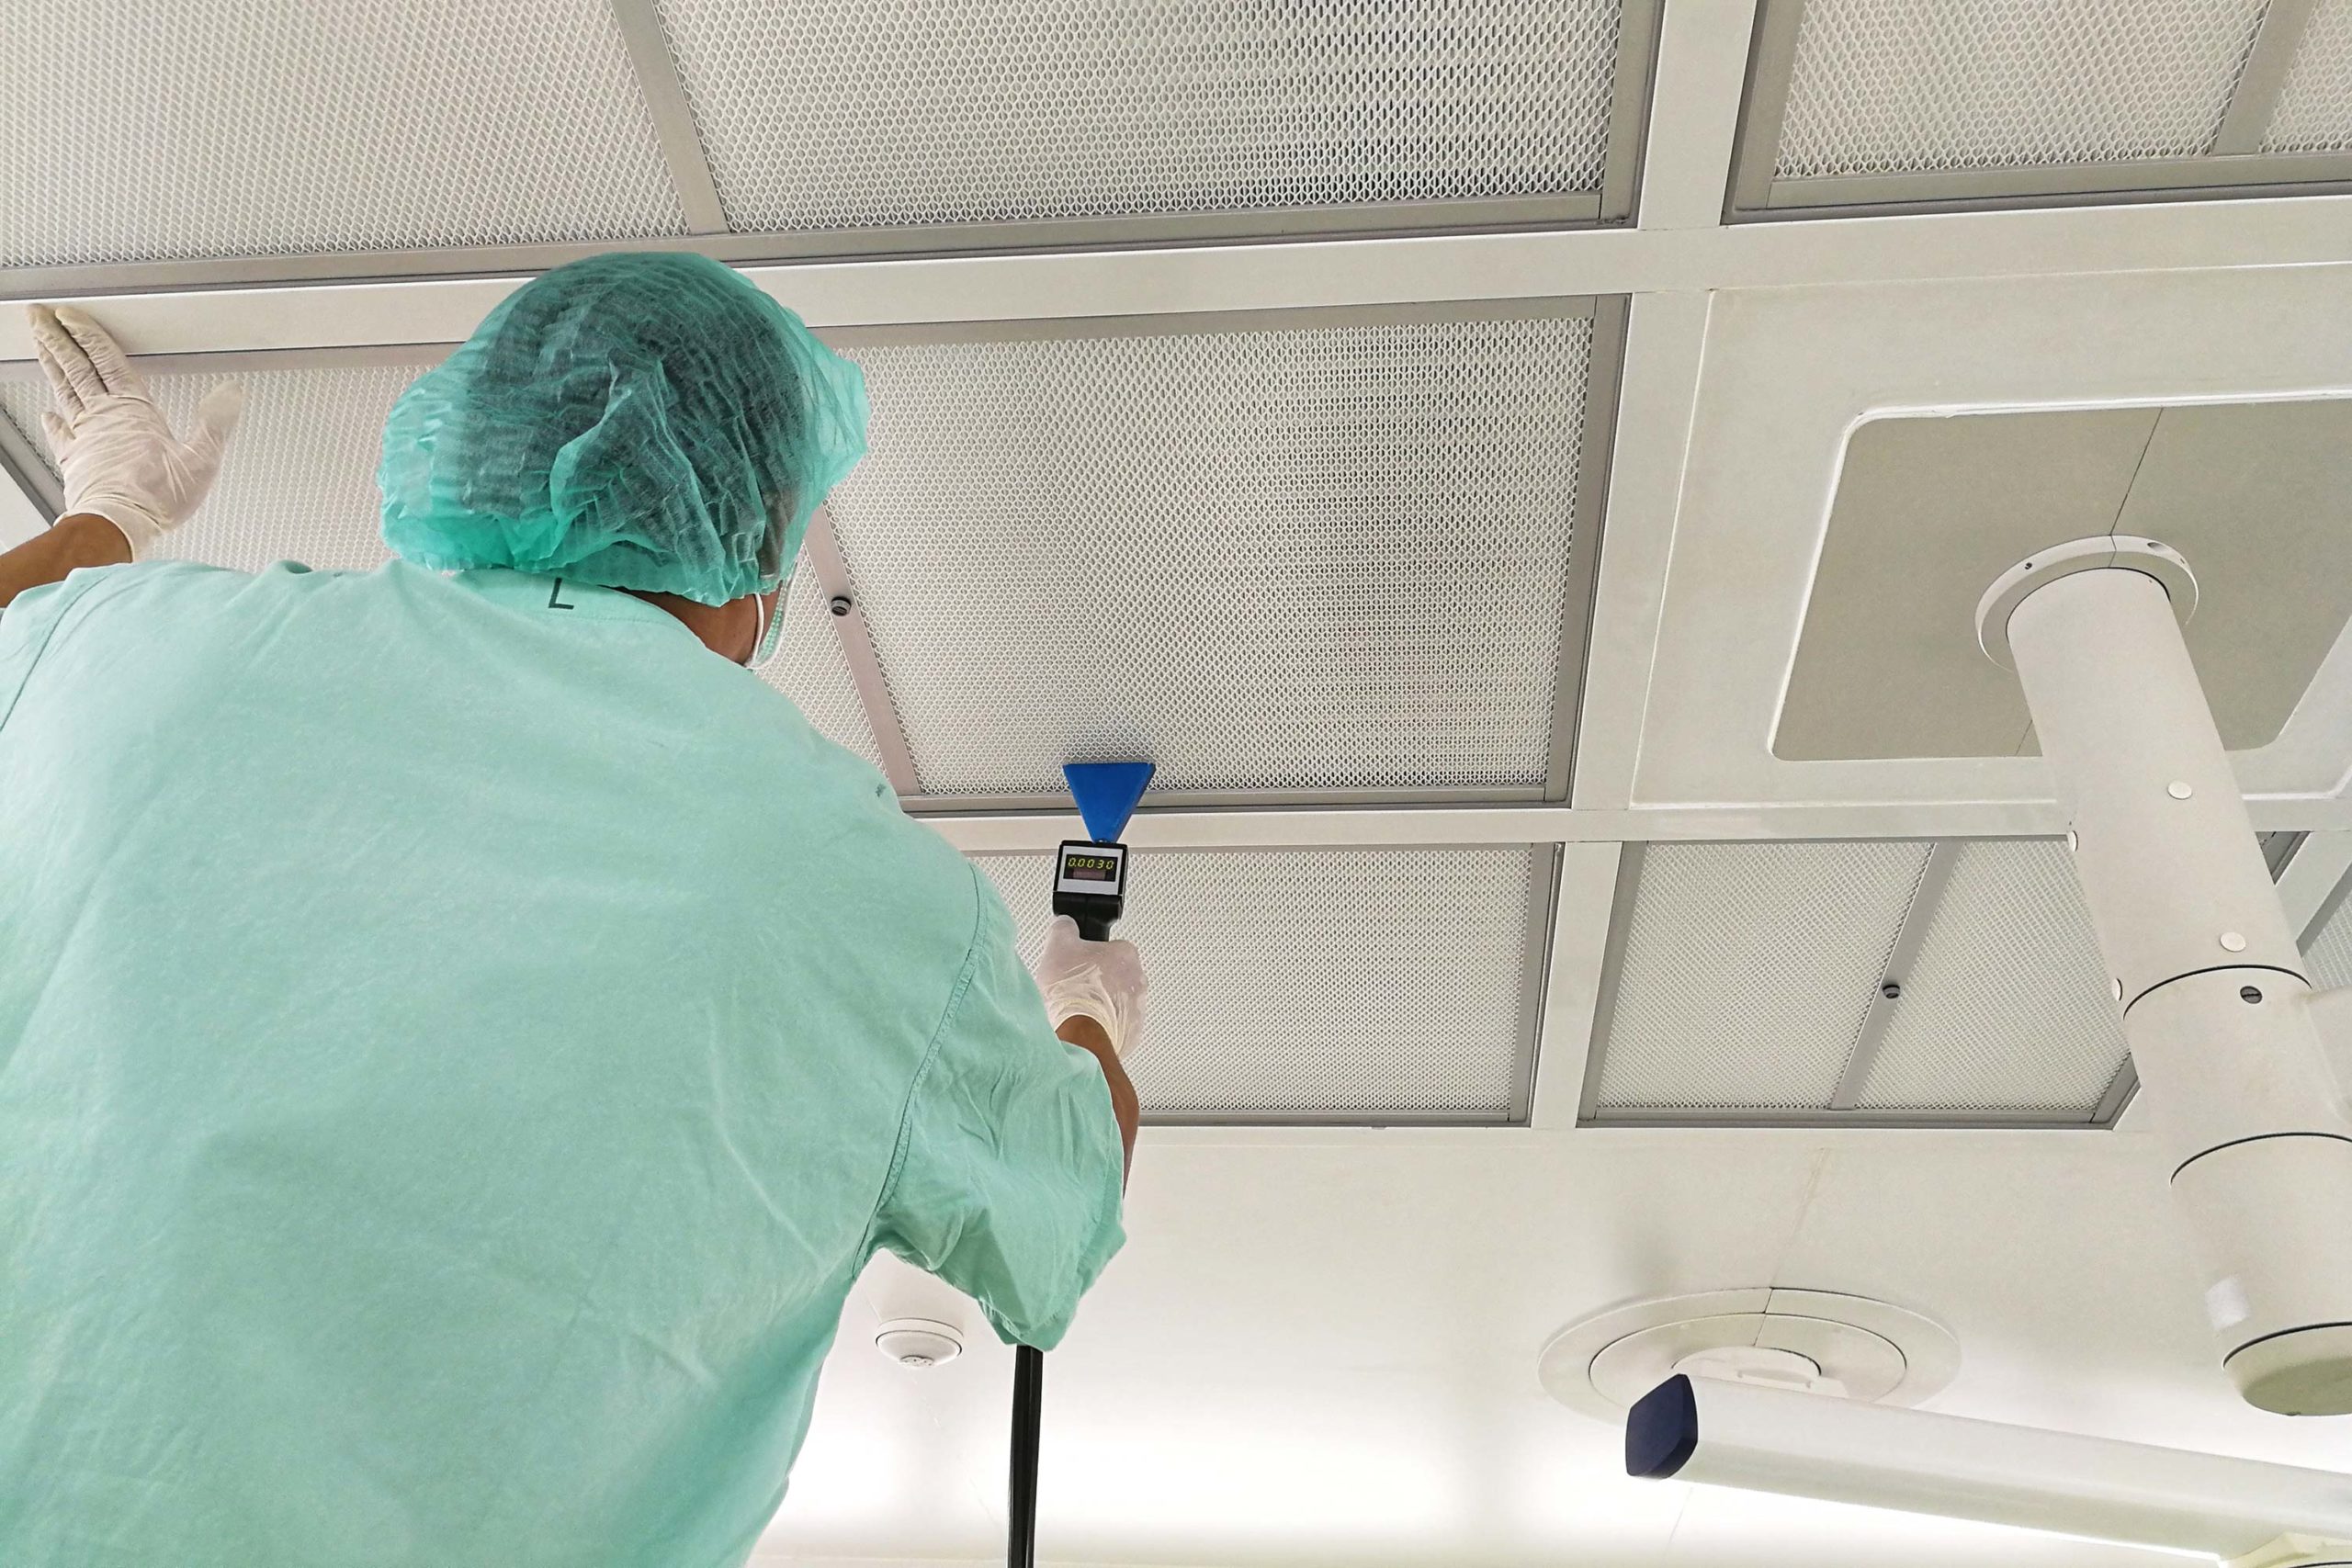 Do You Know the Difference Between a Controlled Environment and a Cleanroom?